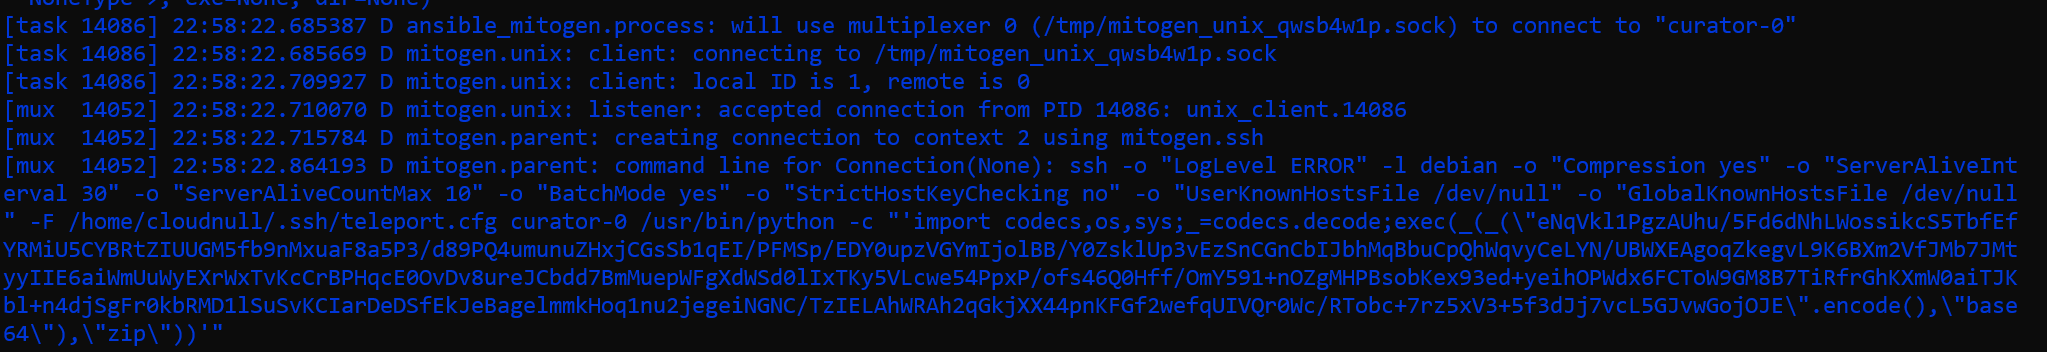 Mitogen and Teleport Ansible